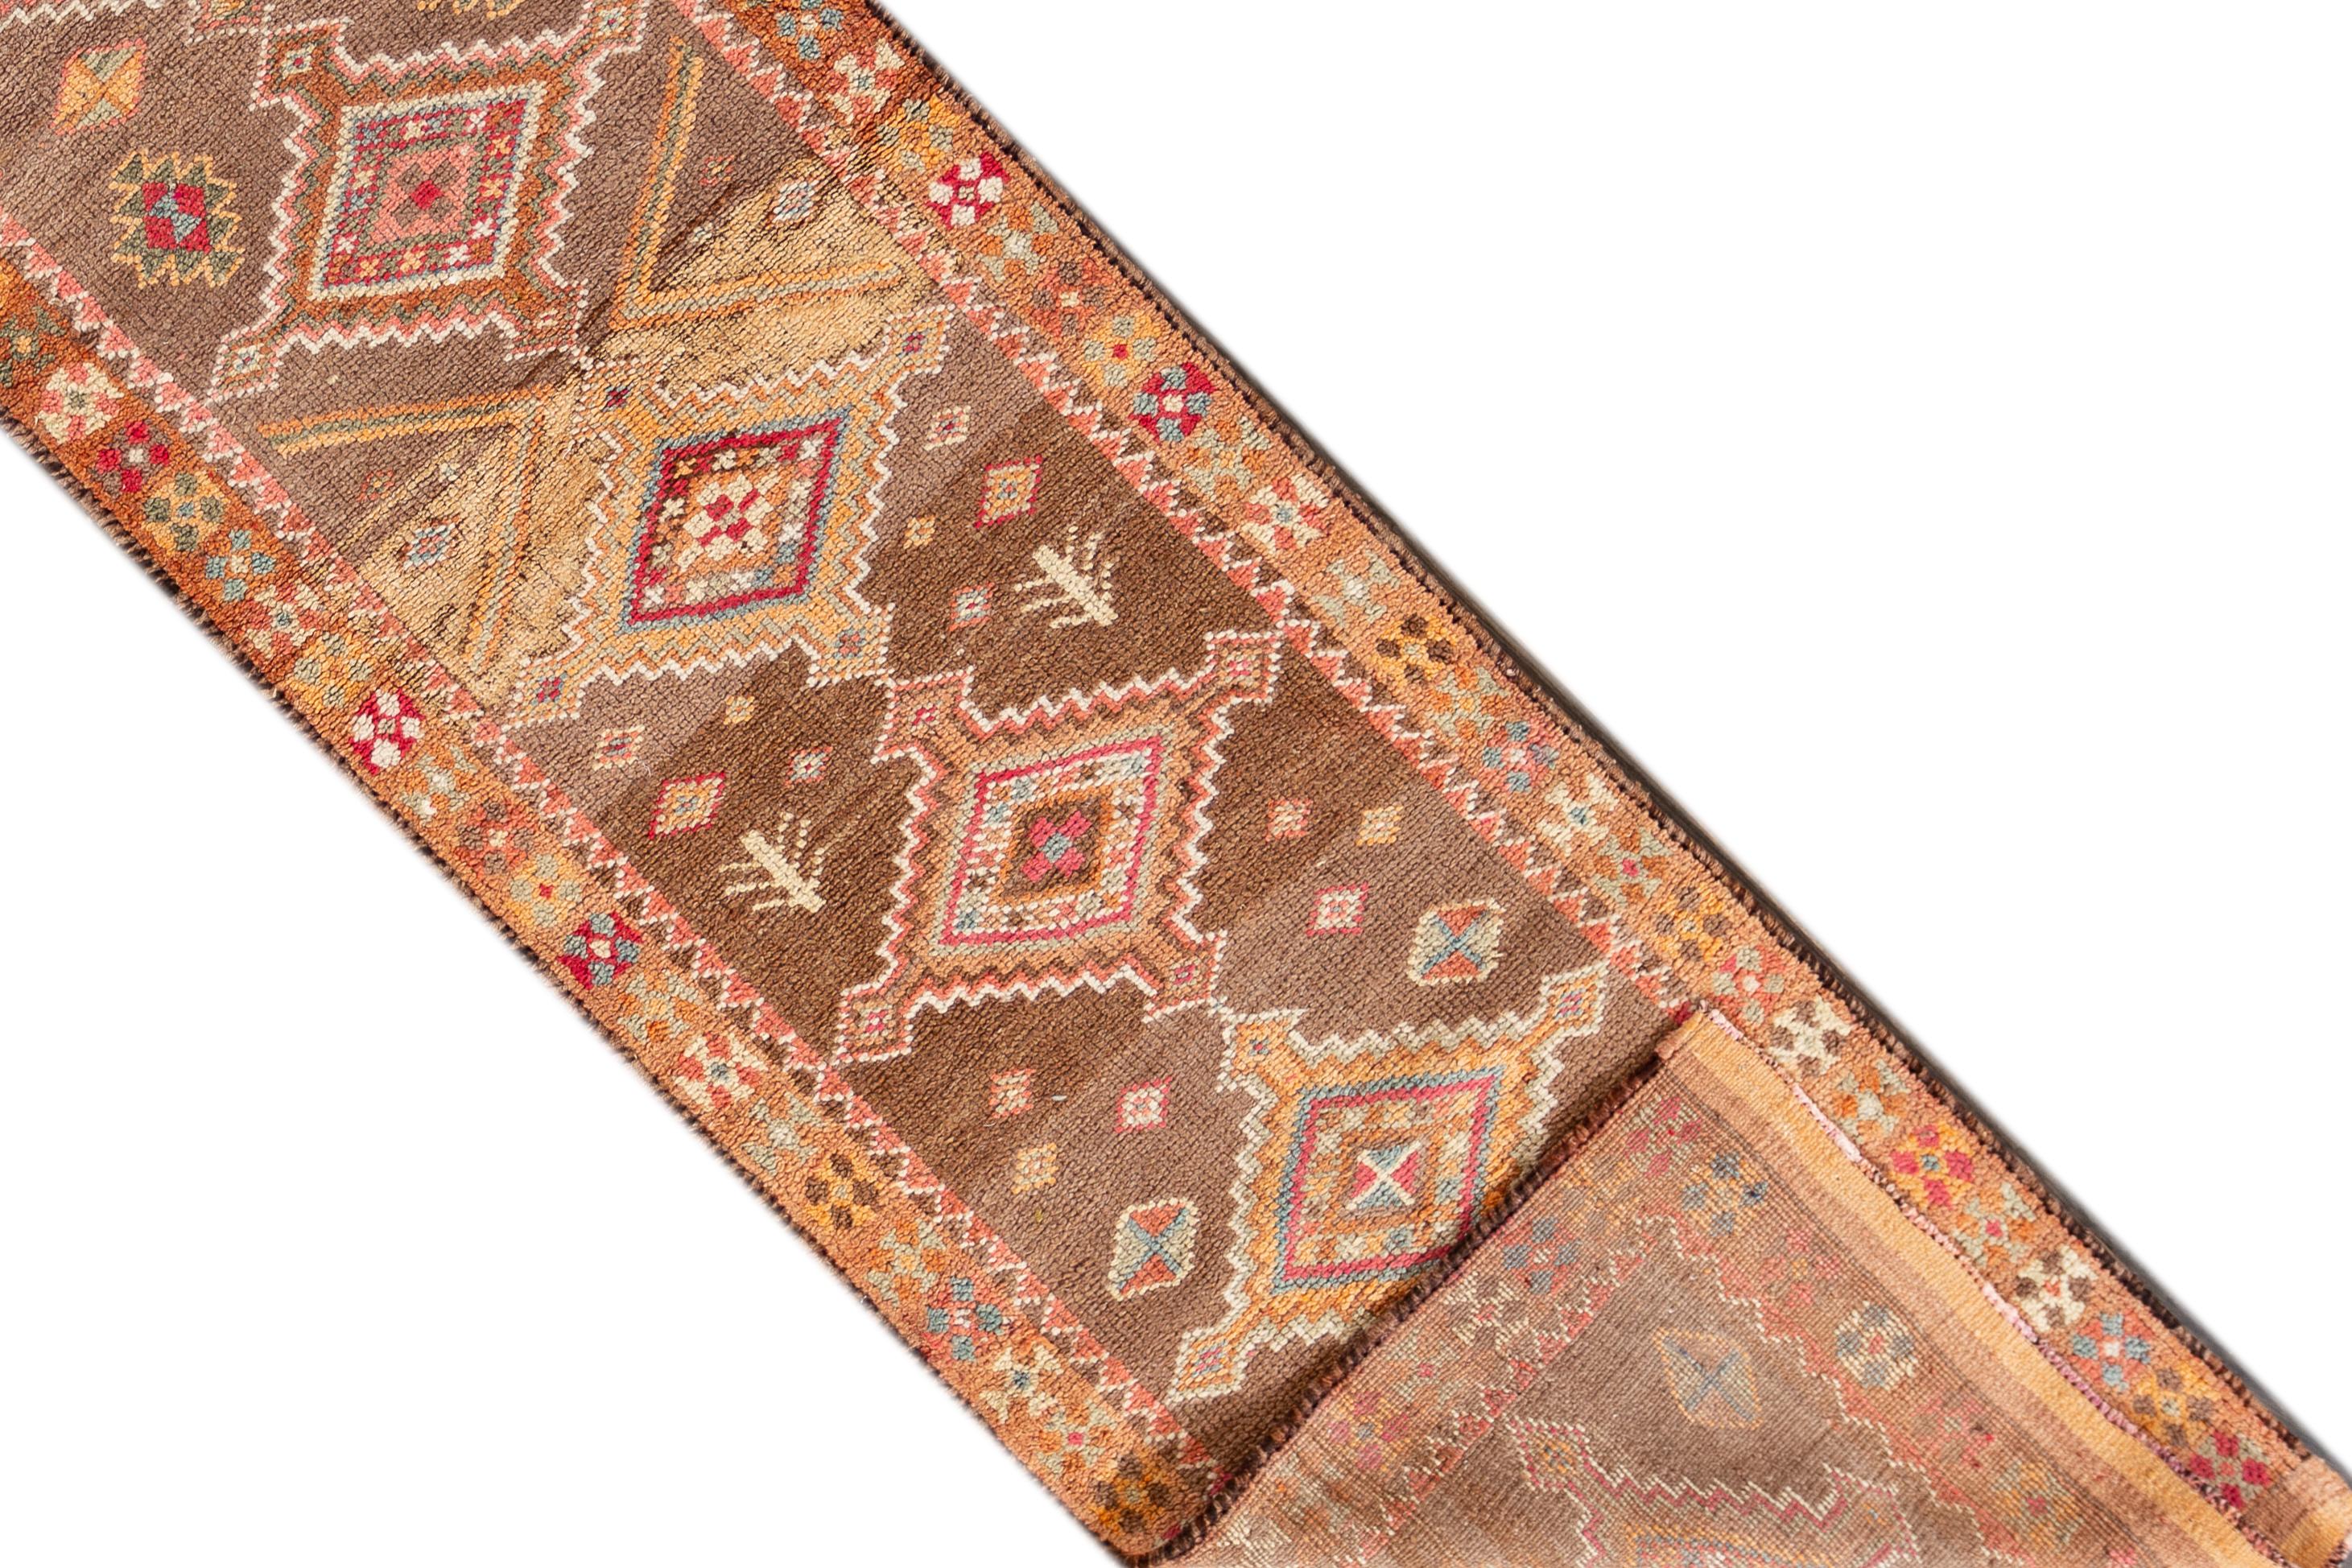 A 20th century vintage Turkish Anatolian runner rug with an all-over geometric motif. This rug measures at 3'1